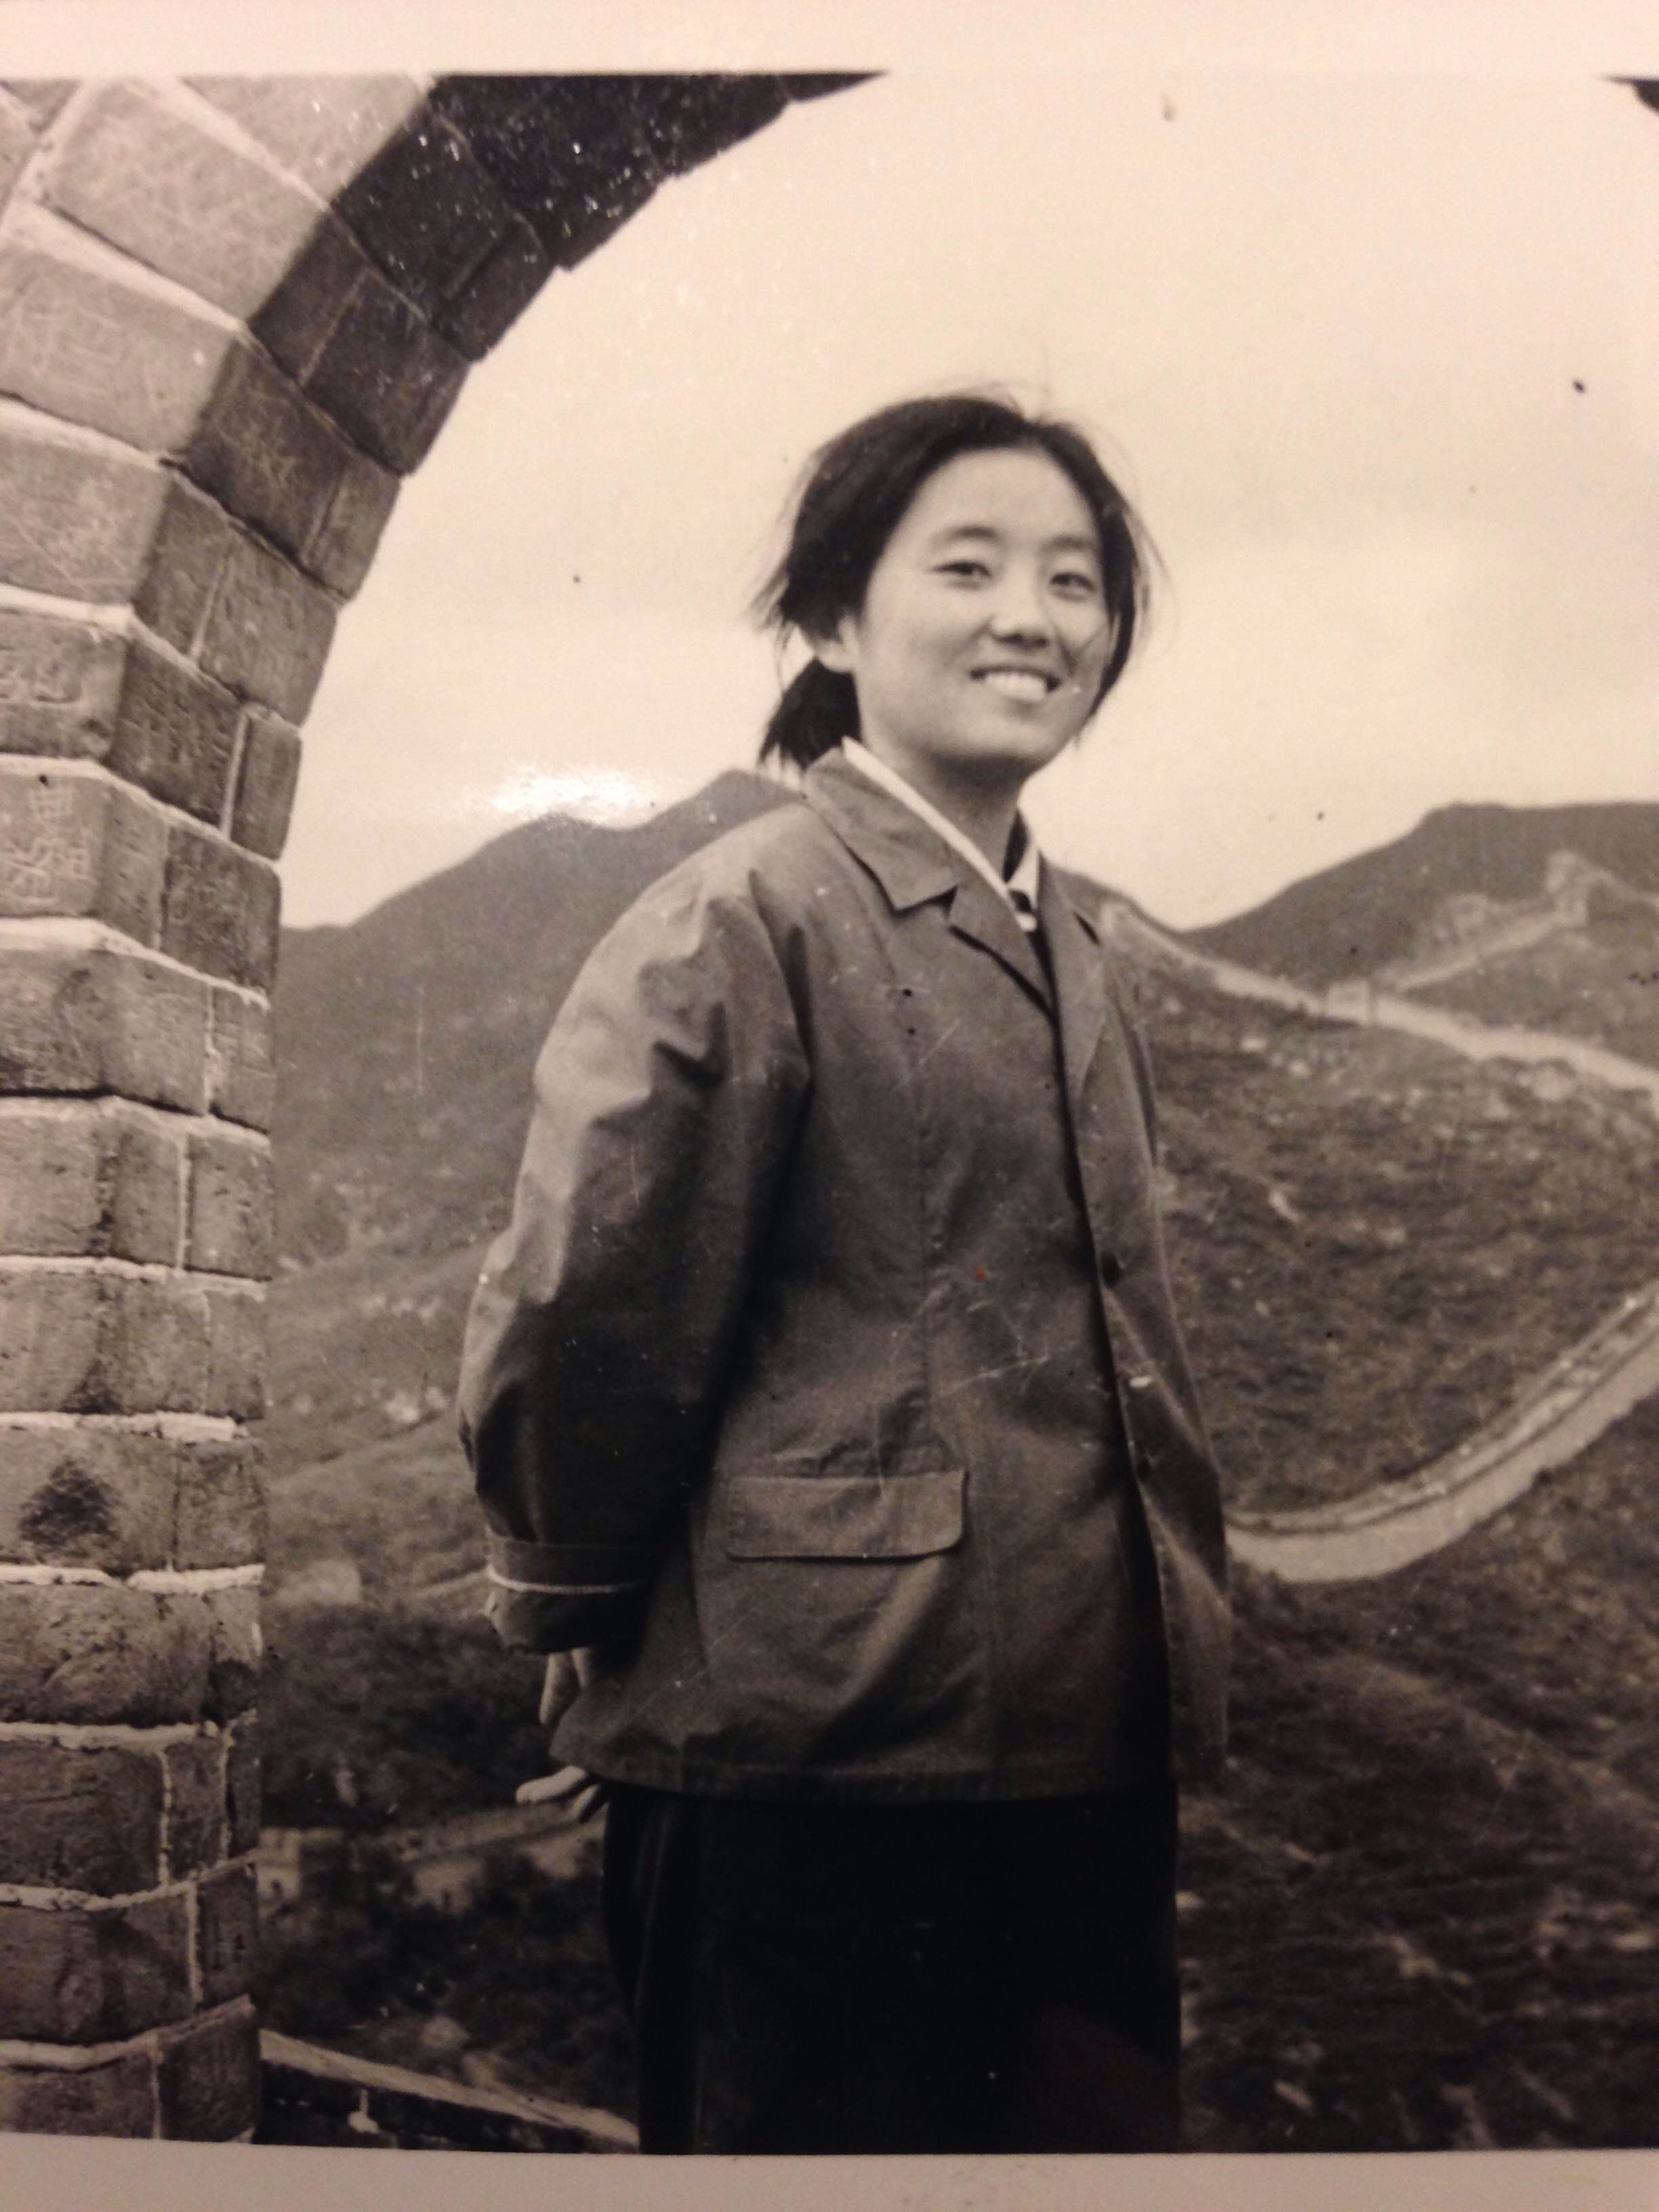  Elena's mom in Mao-era China, standing on the Great Wall. Image courtesy the author.&nbsp; 